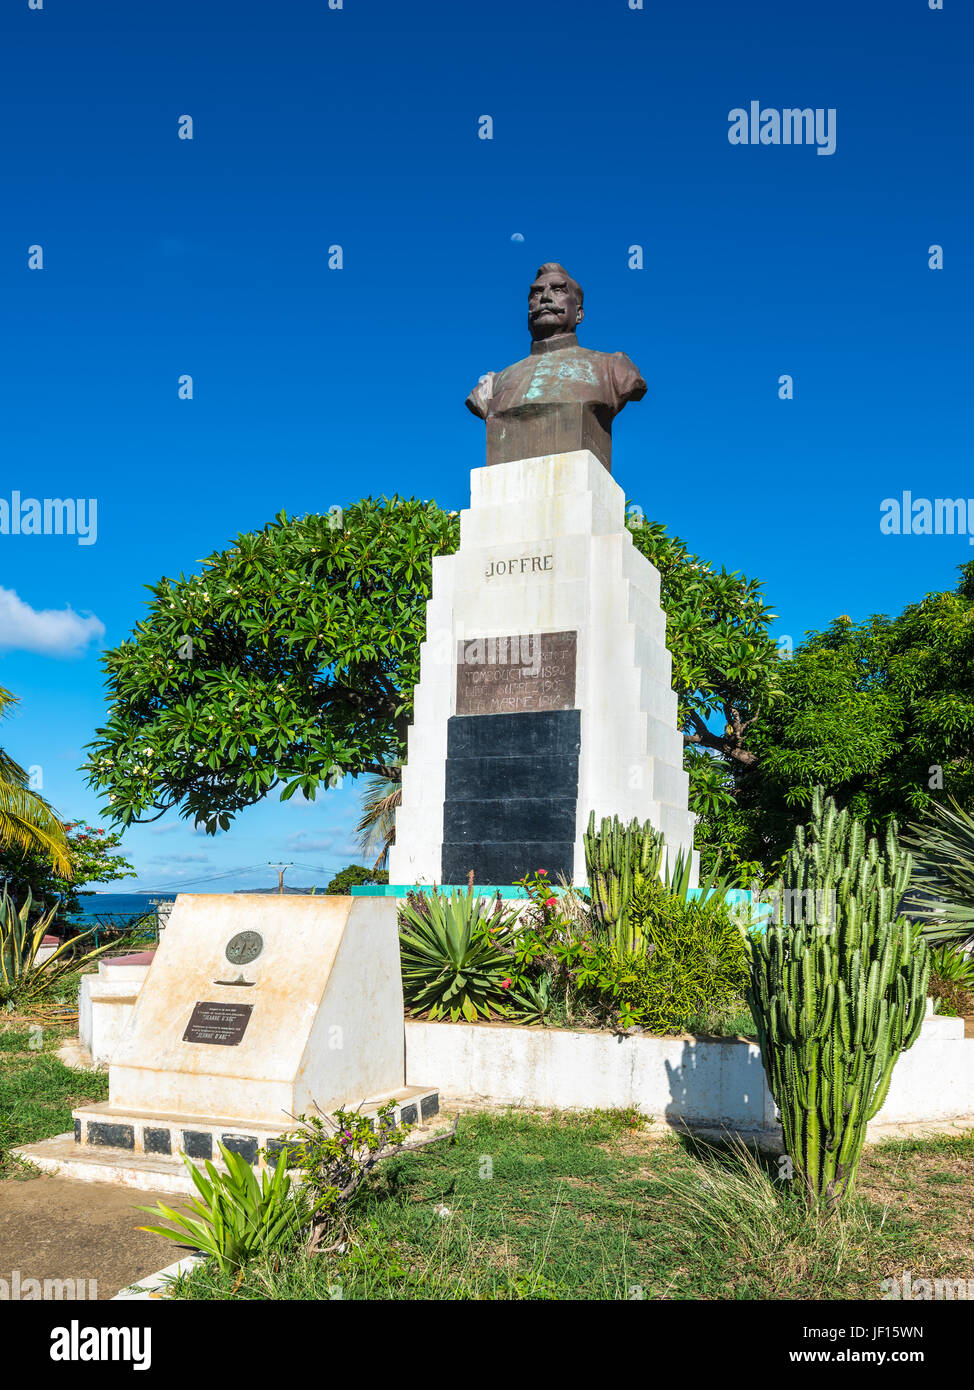 Antsiranana, Madagascar - December 20, 2015: The statue of French General Joffre in Antsiranana (formerly Diego Suarez), north of Madagascar, East Afr Stock Photo